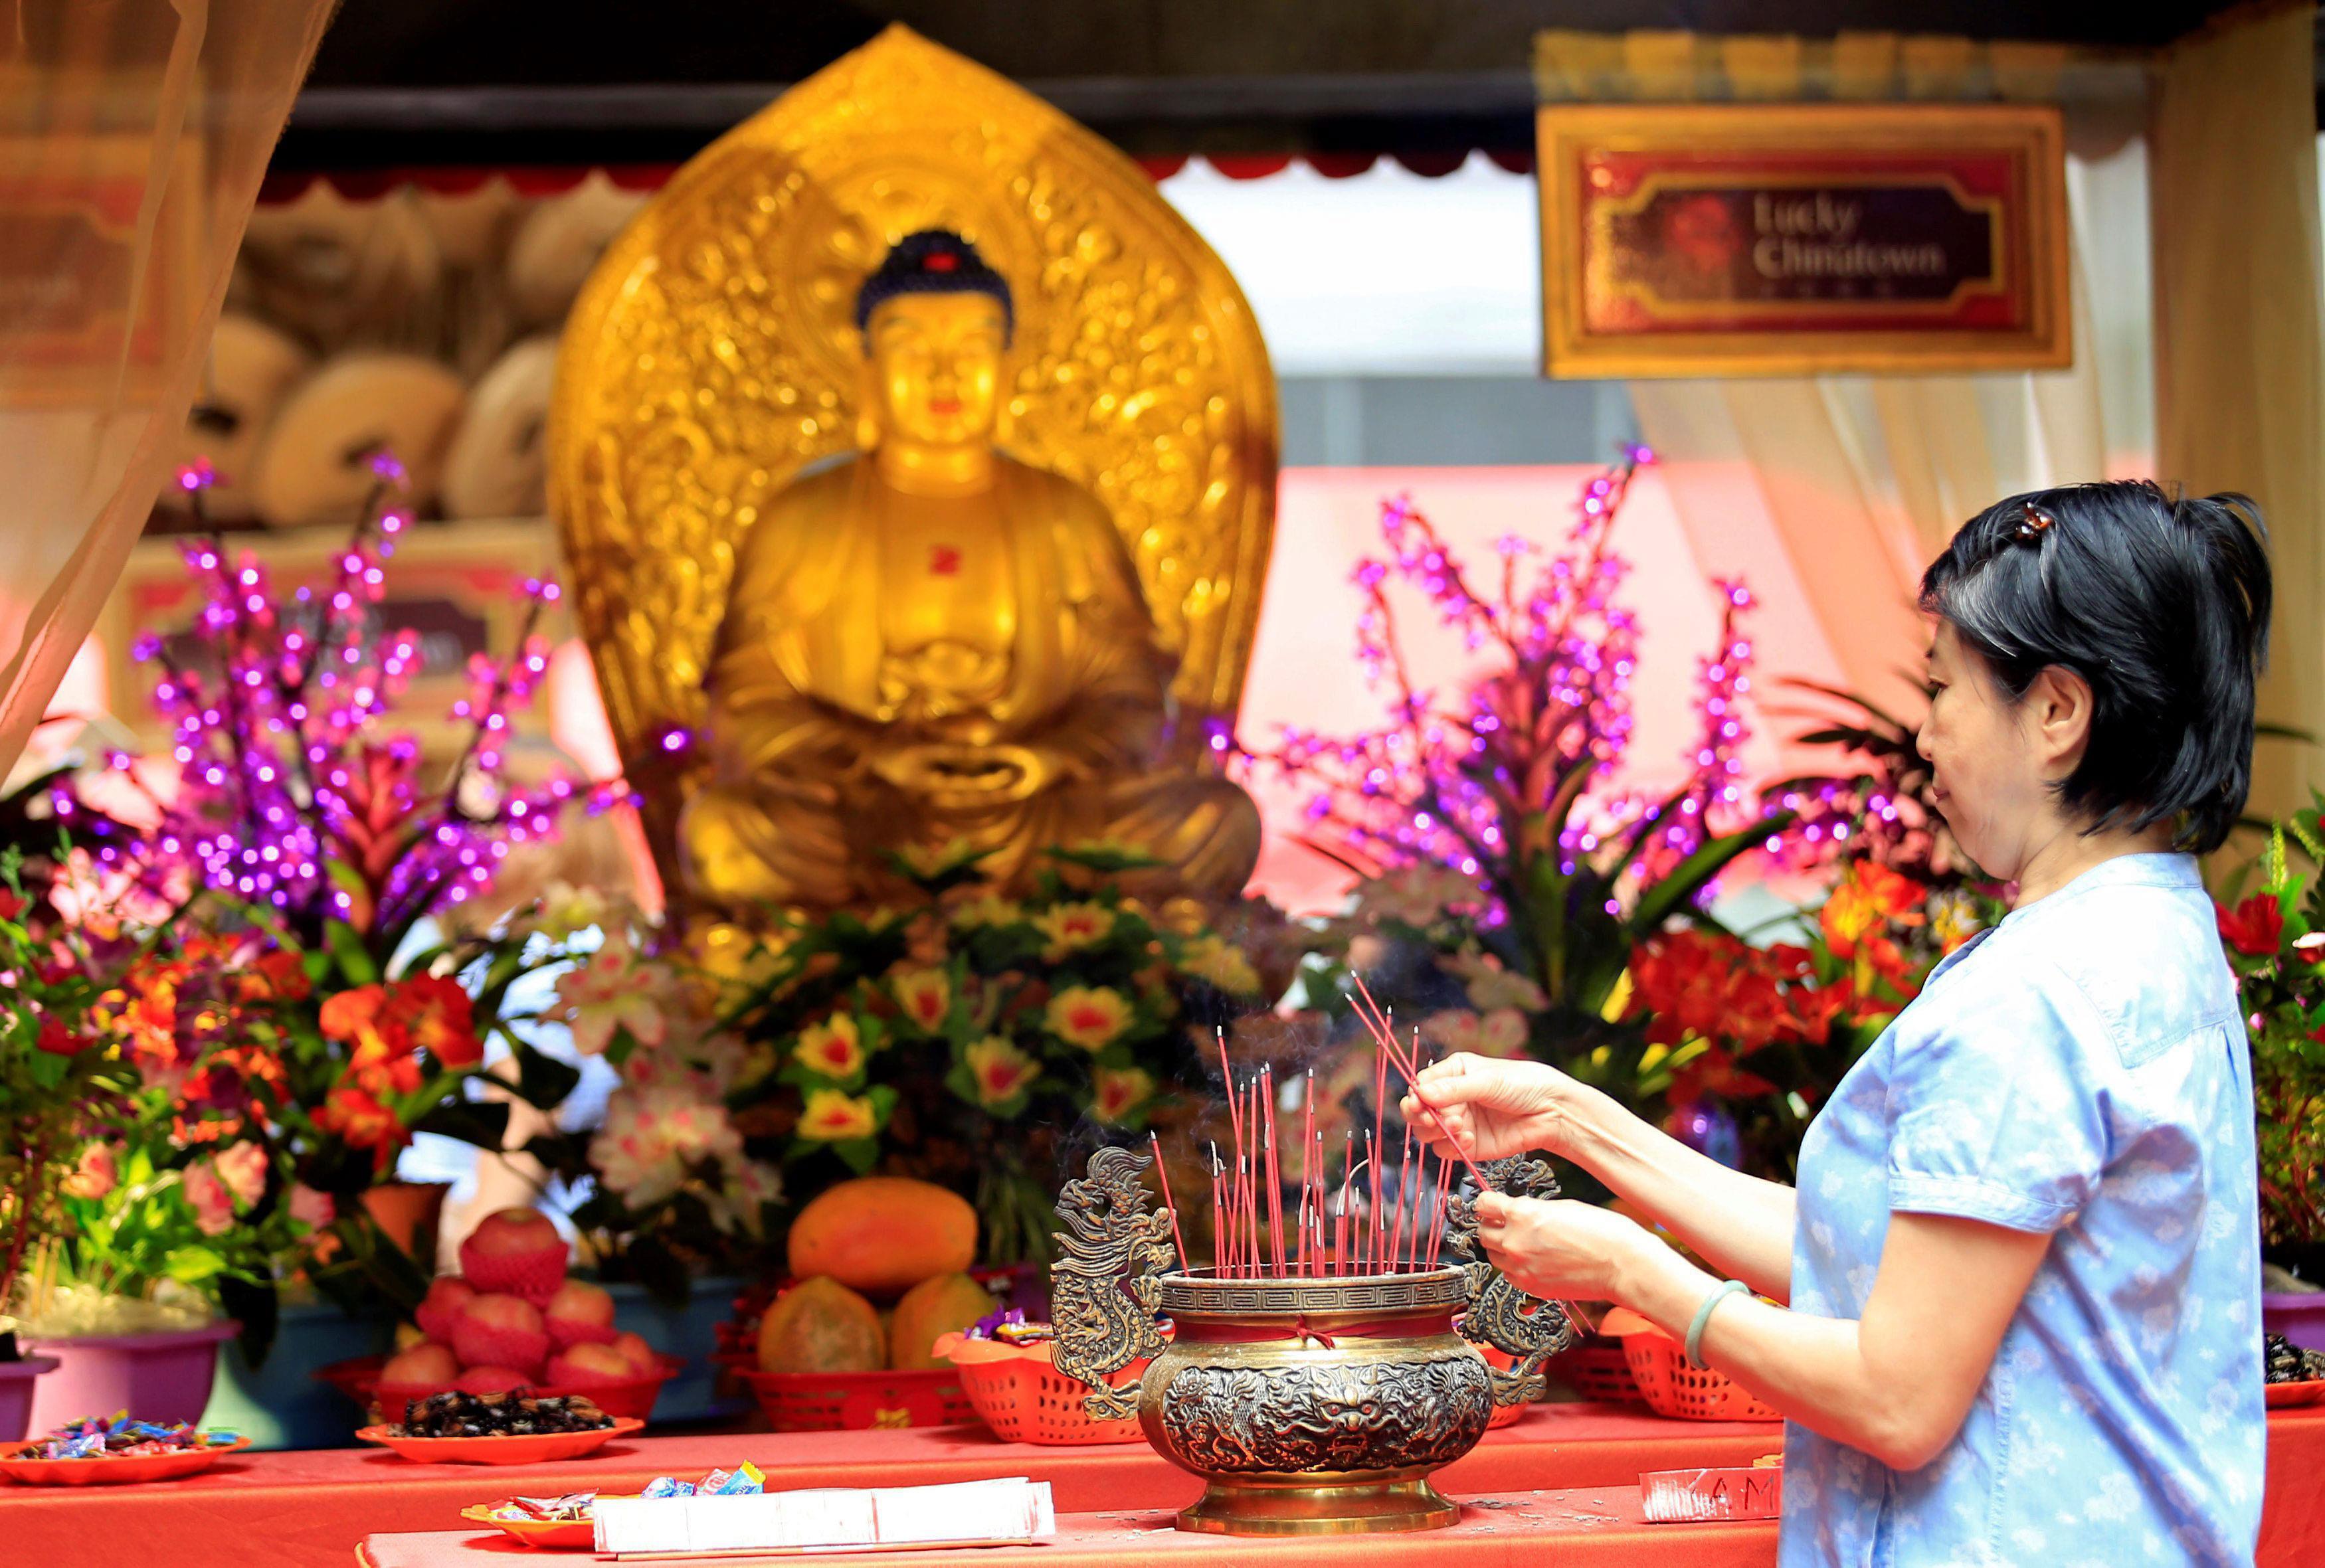 A Filipino-Chinese woman lights incense in front of a Buddha altar display at a Lucky Chinatown mall